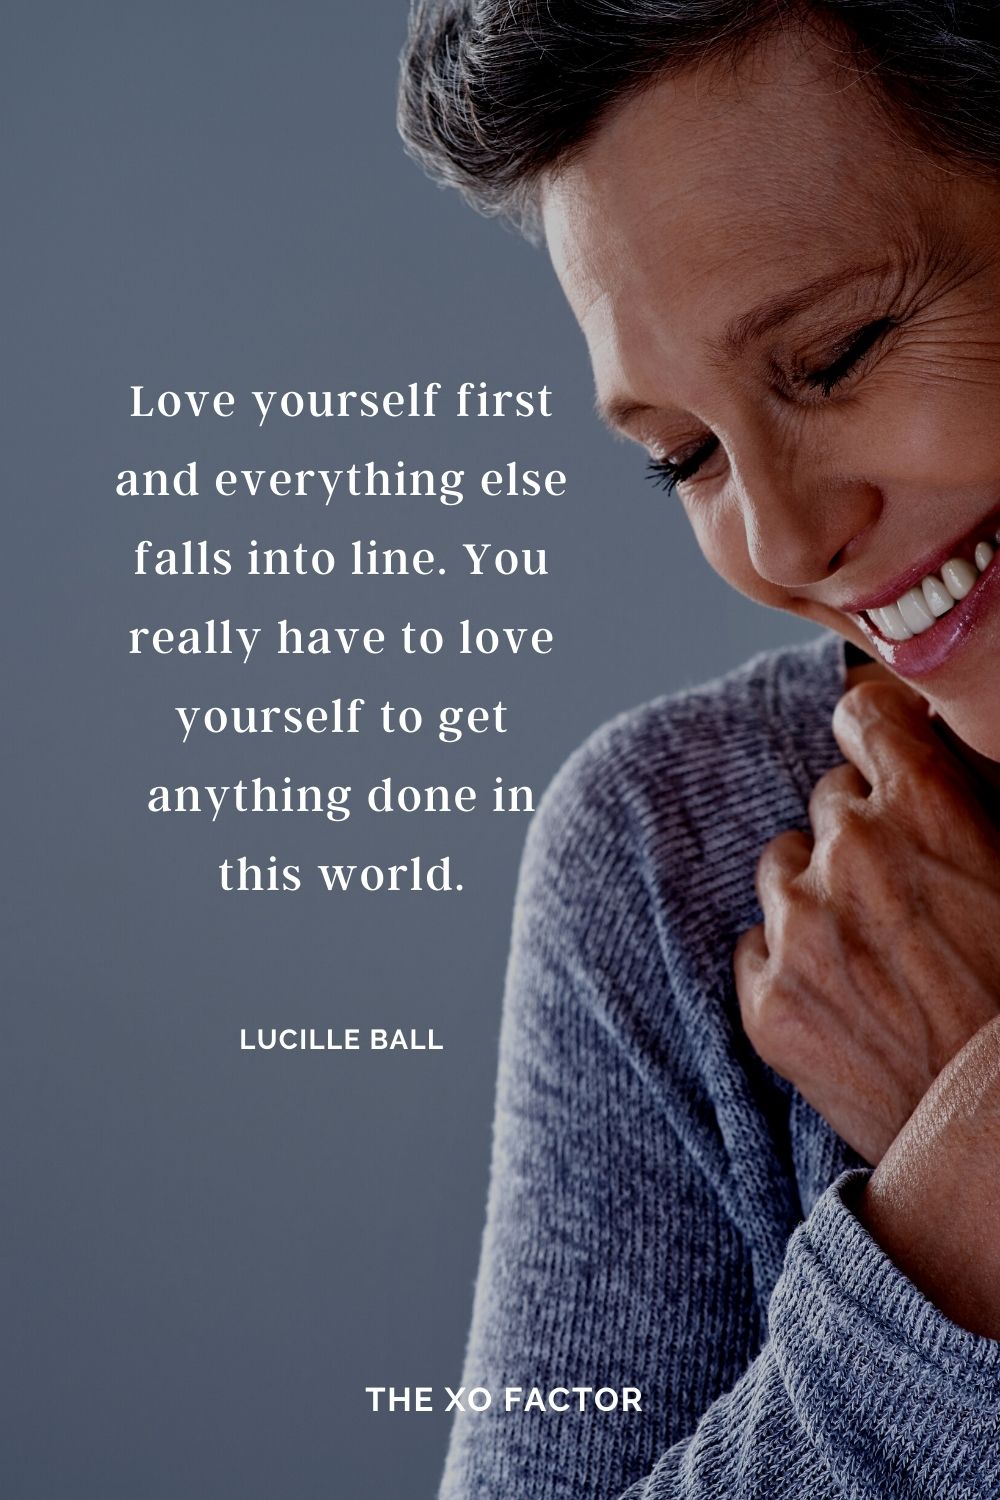 Love yourself first and everything else falls into line. You really have to love yourself to get anything done in this world. Lucille Ball